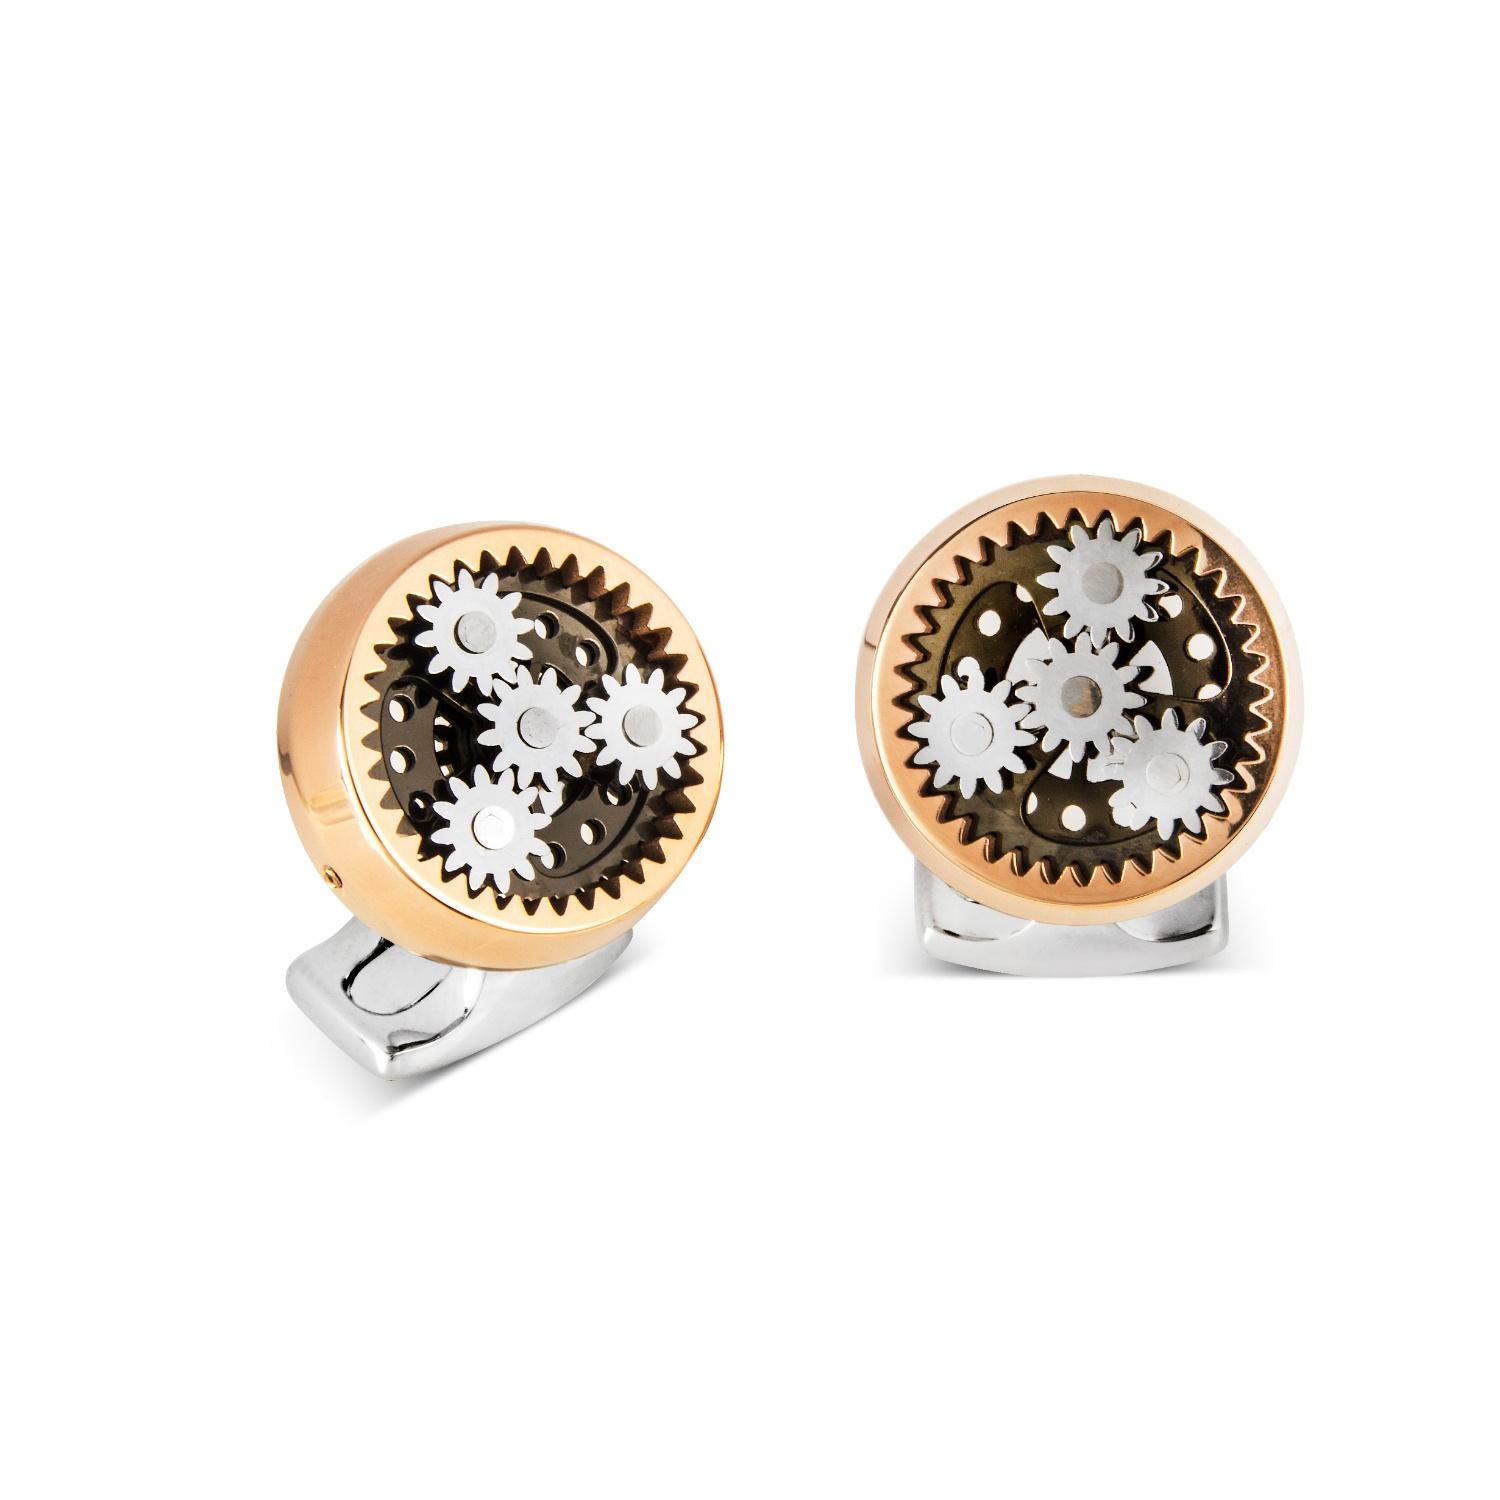 Sun and Planet Gear Cuff Links in Rose Gold